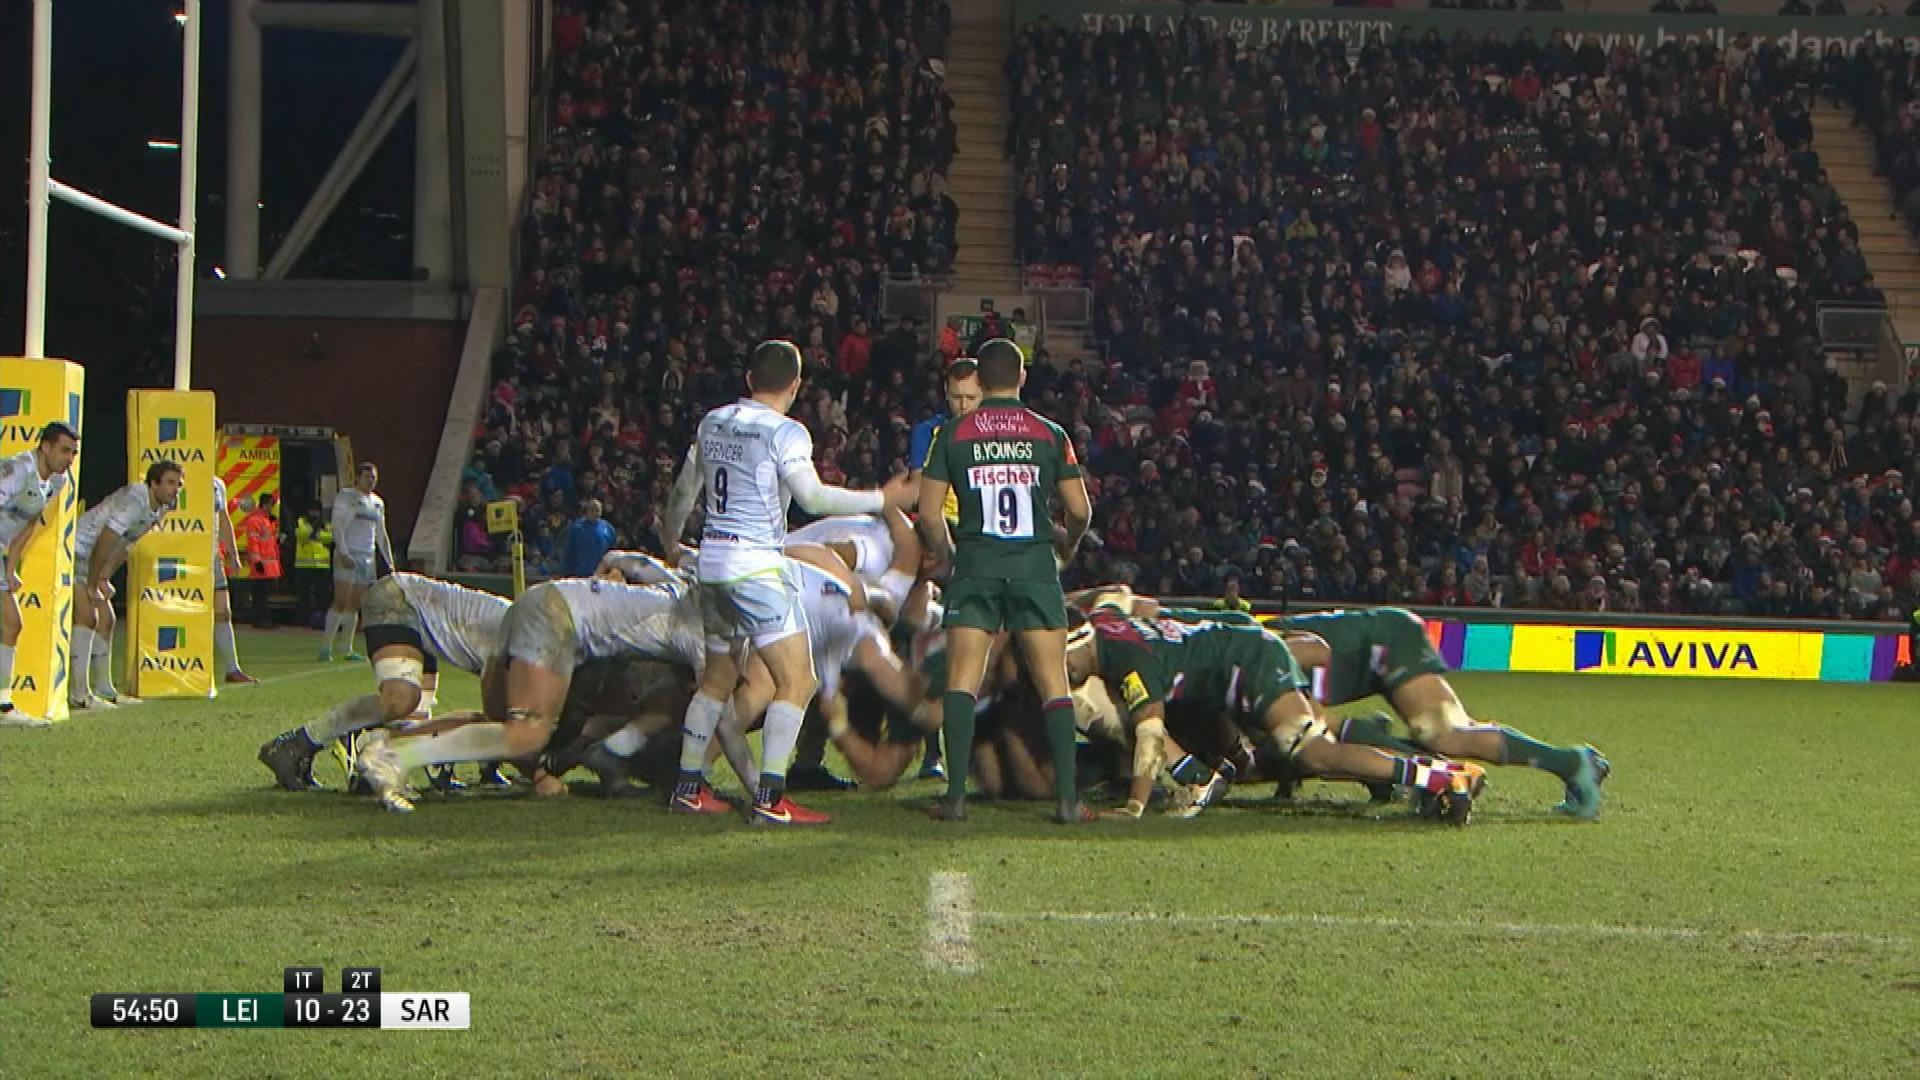 Saracens Leicester Tigers 17 highlights